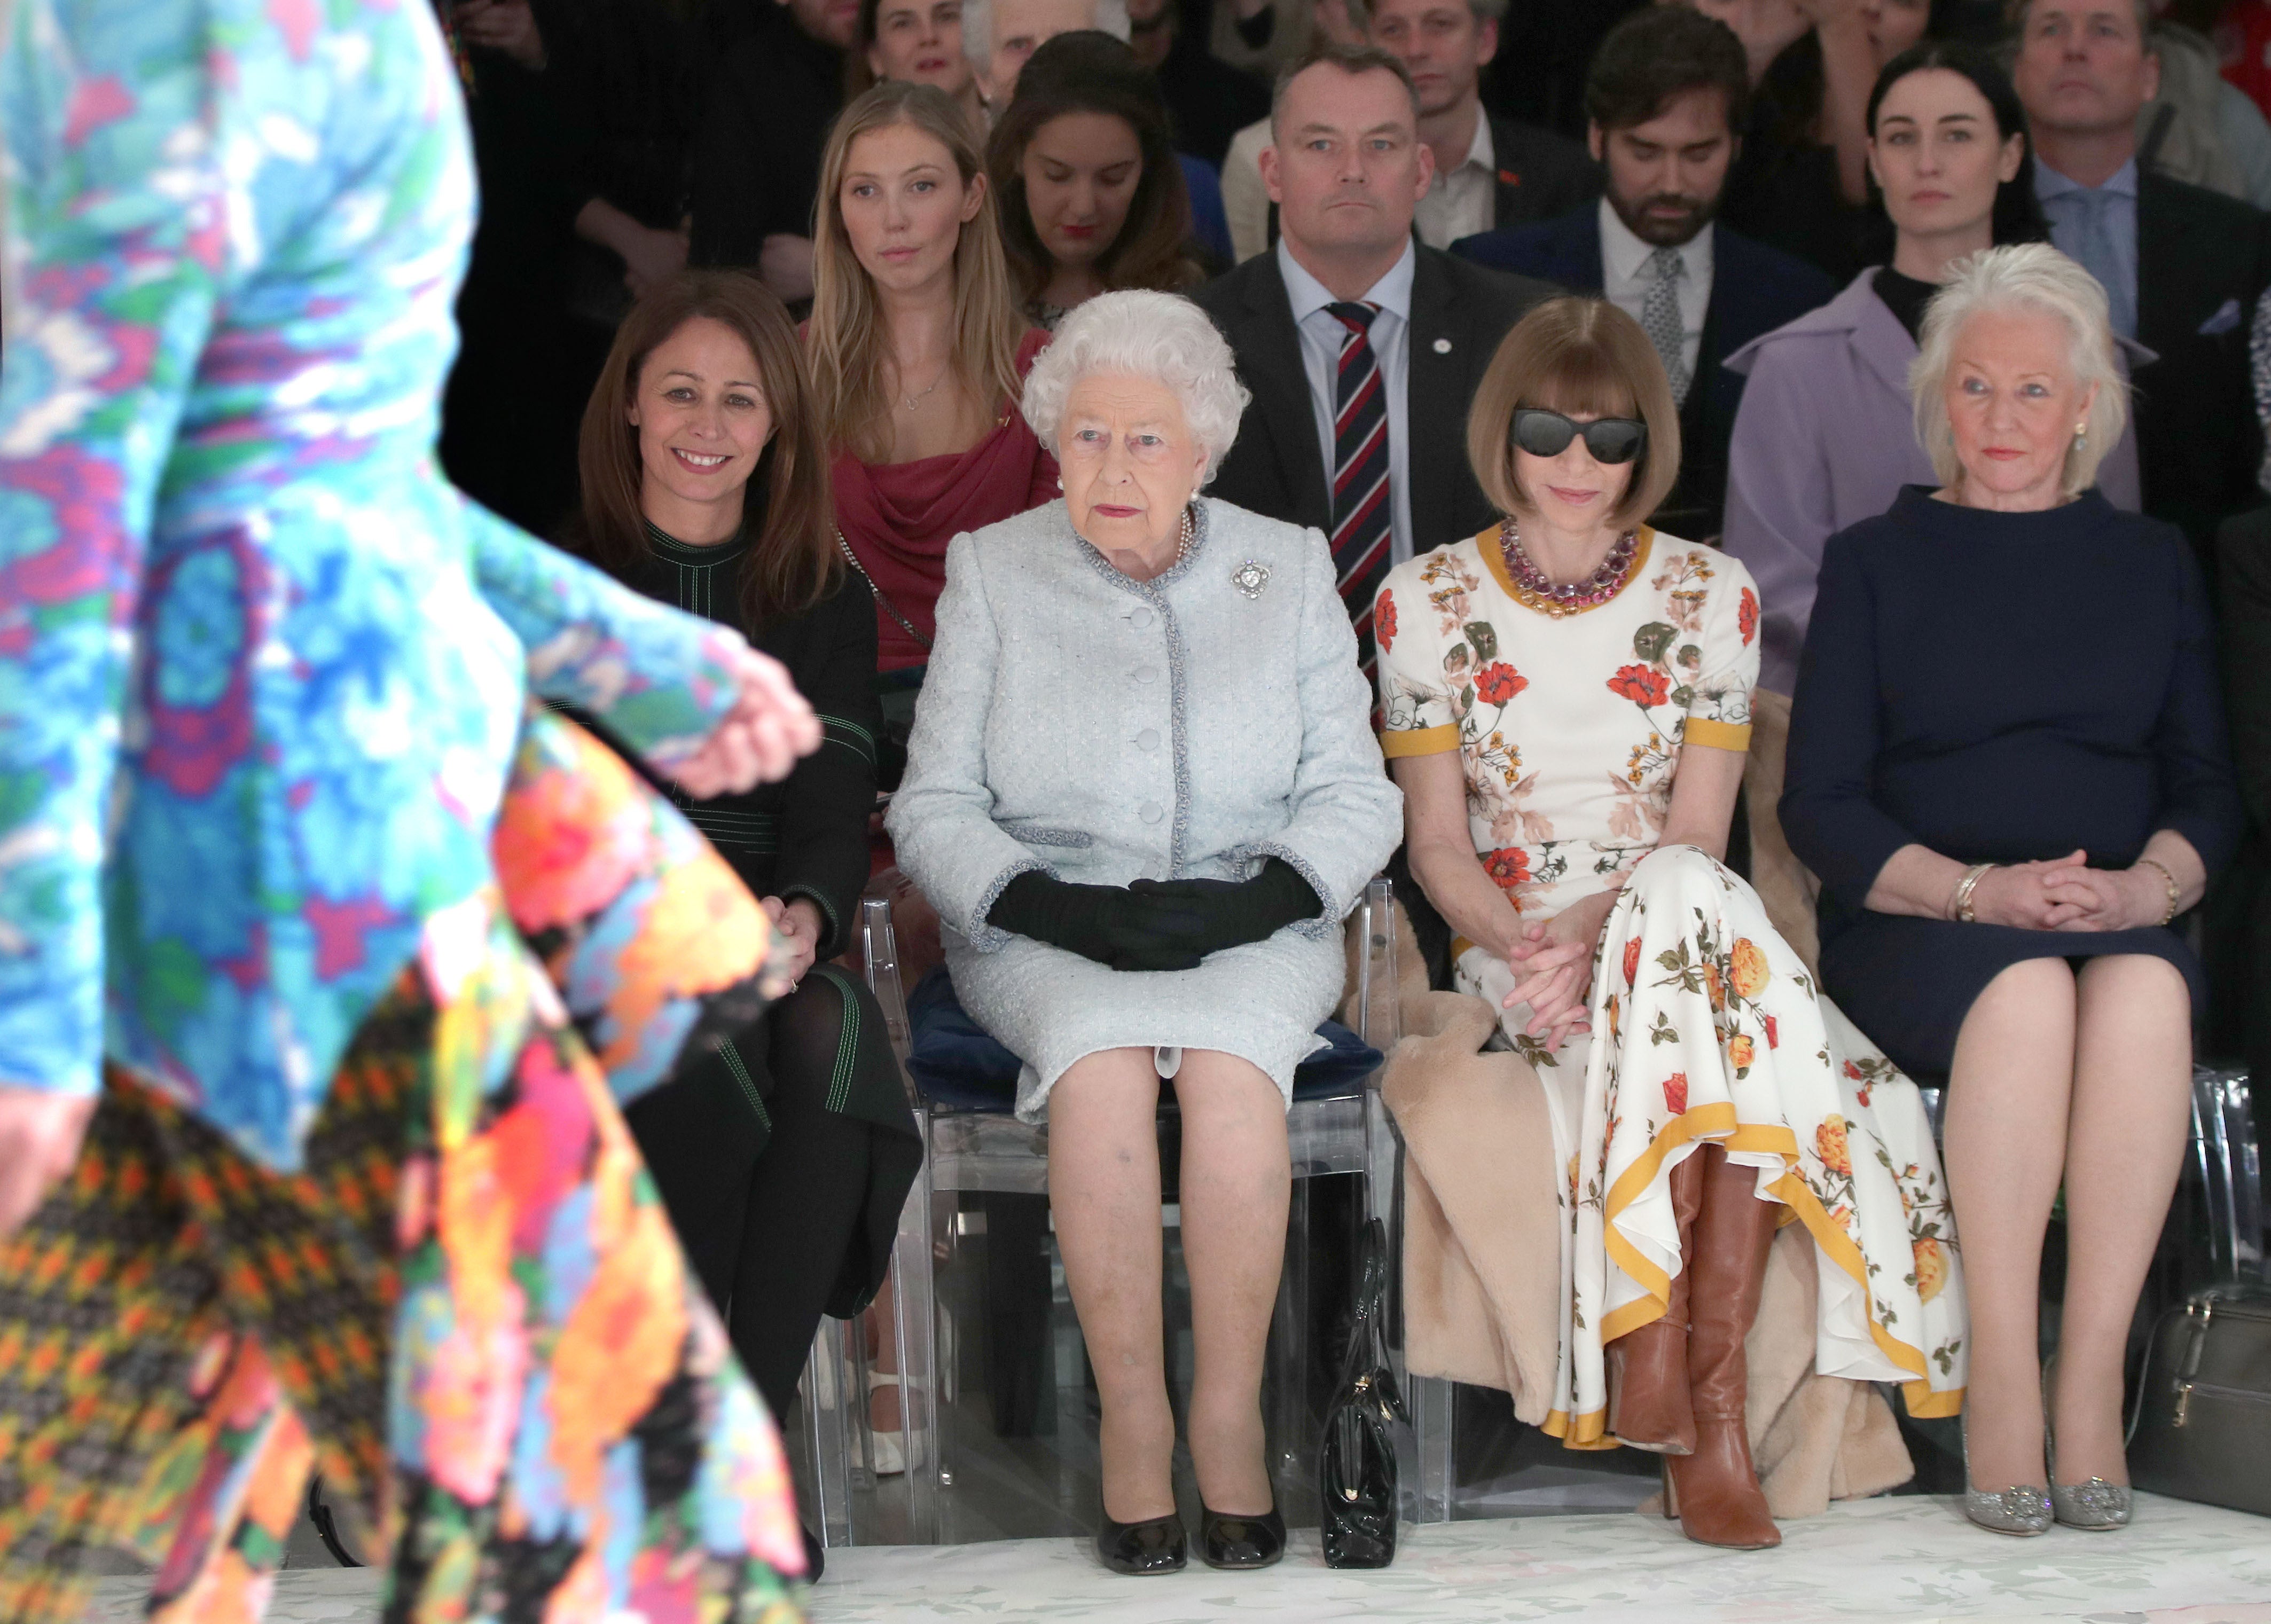 Designers including S.S. Daley honoured the Queen with their London Fashion Week shows (Yui Mok/PA)